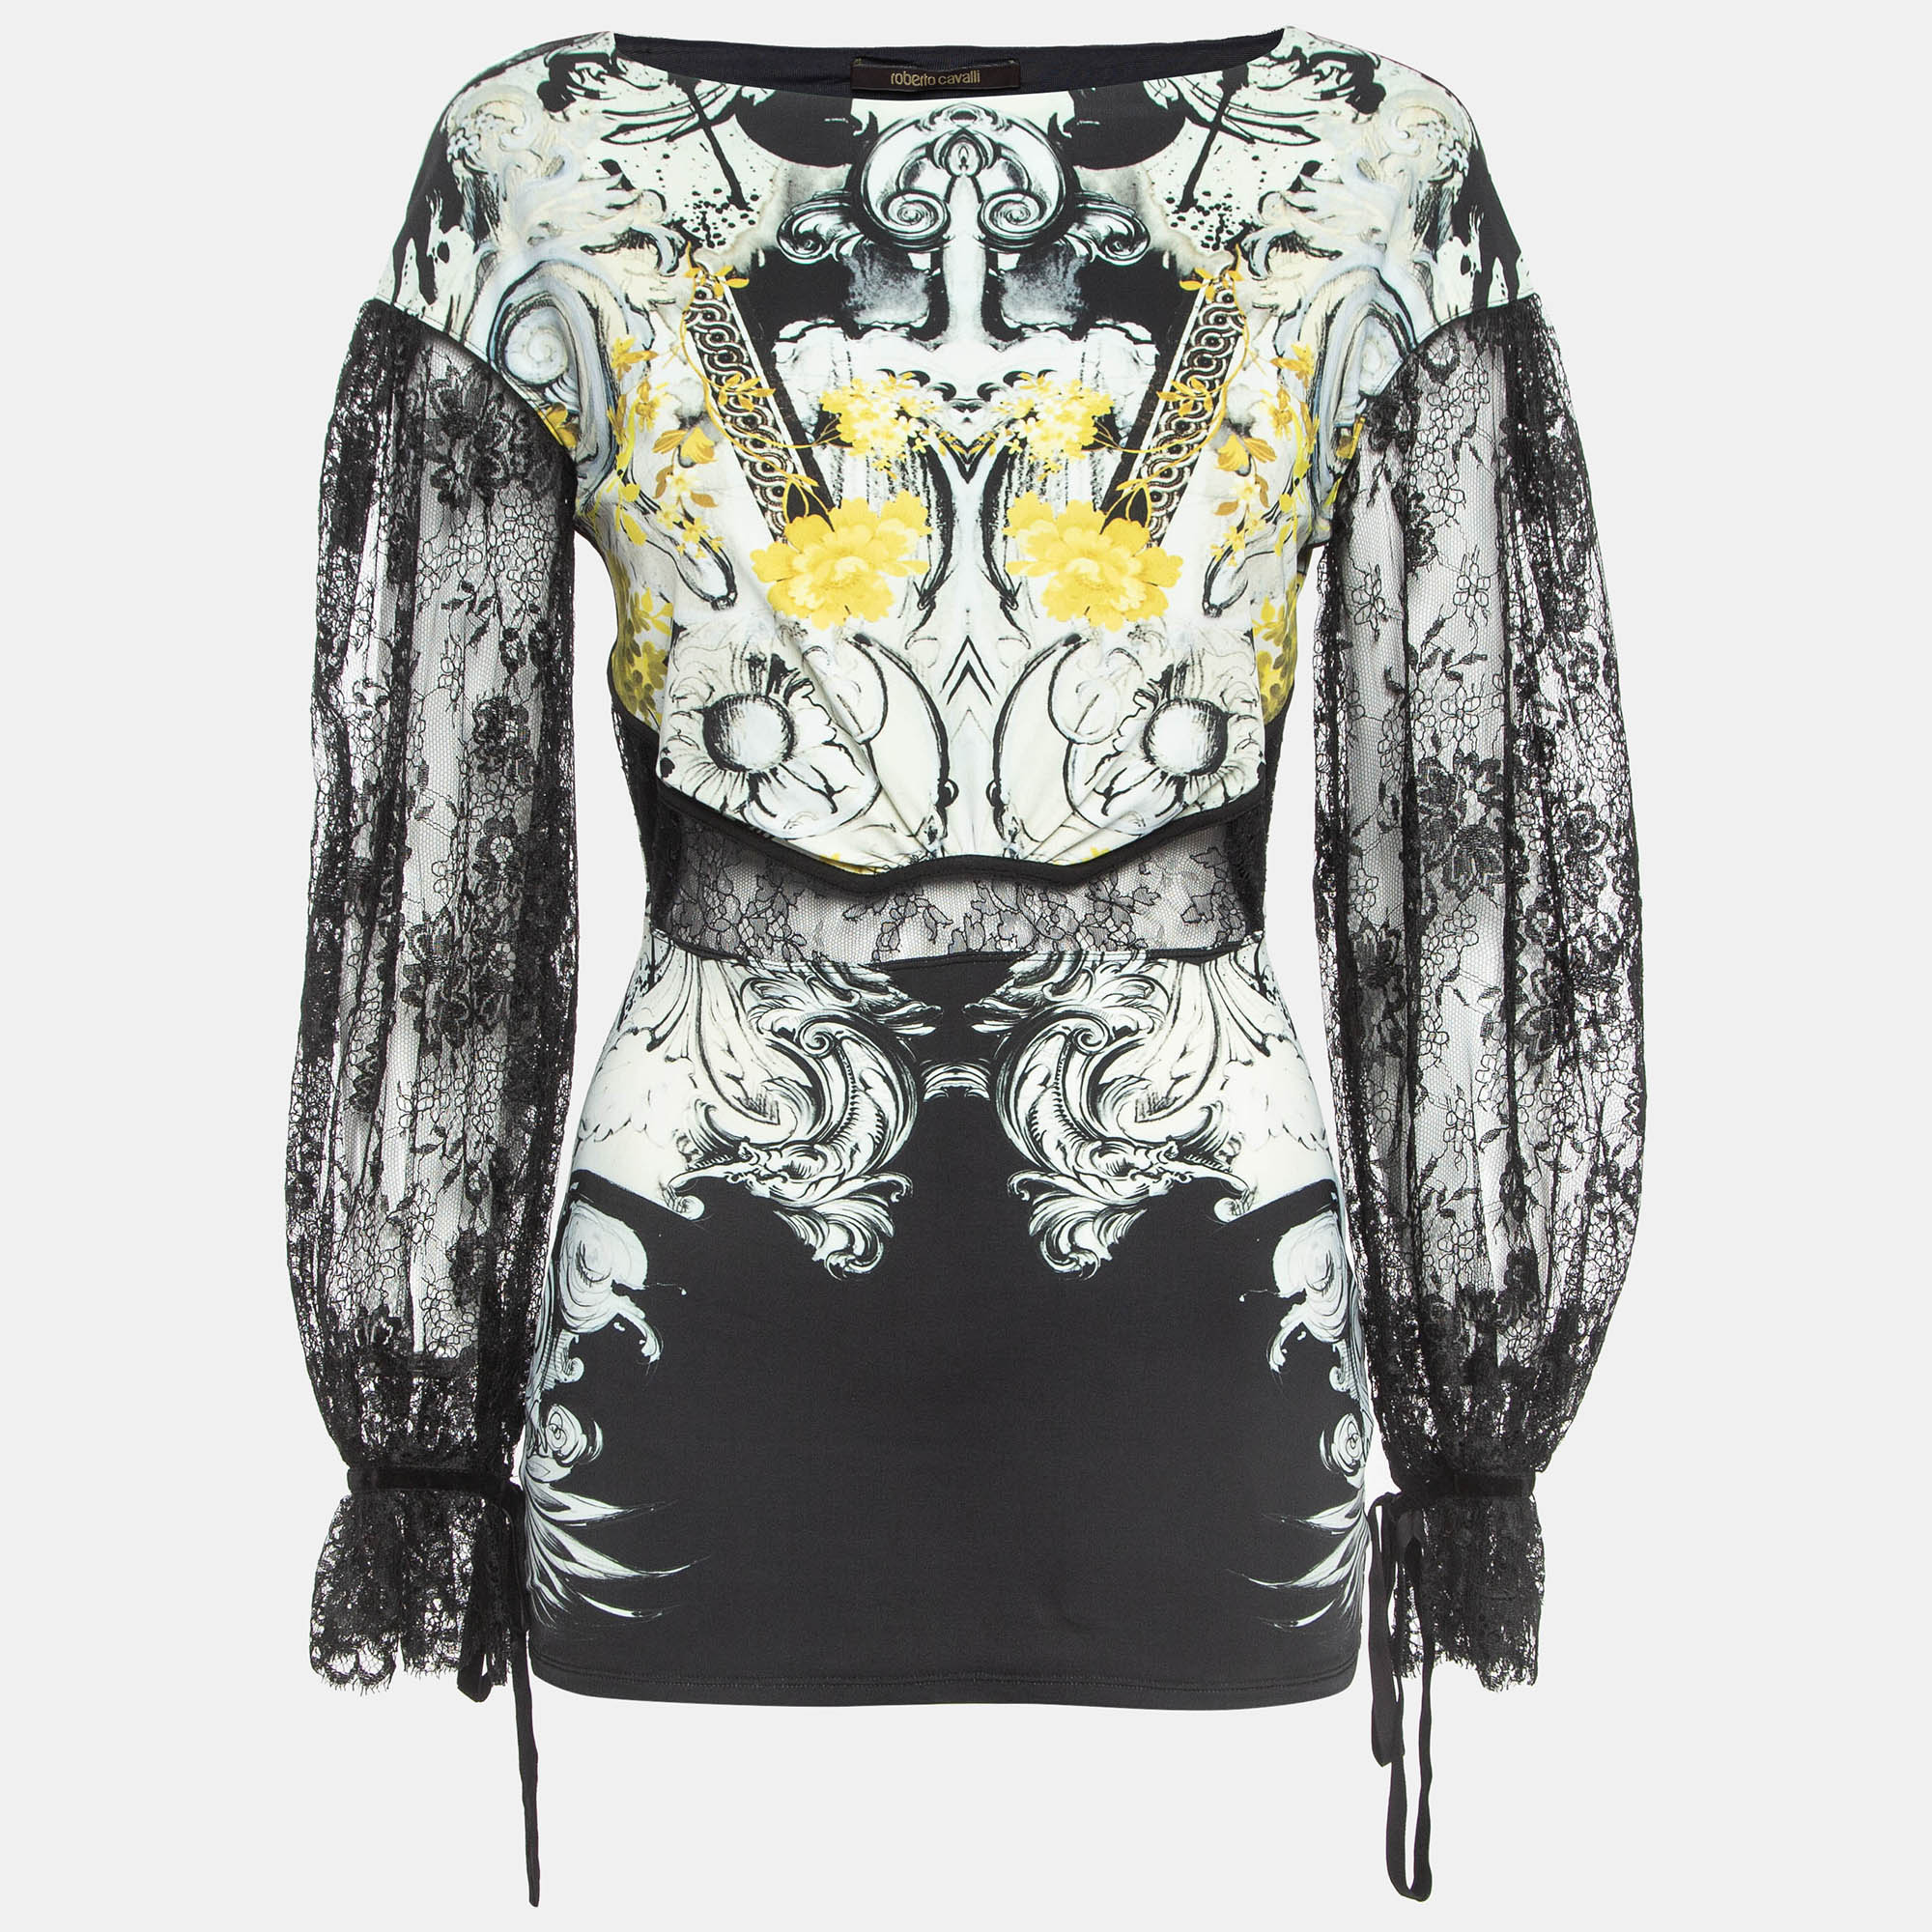 Roberto cavalli jersey multicolor print lace detailed top m